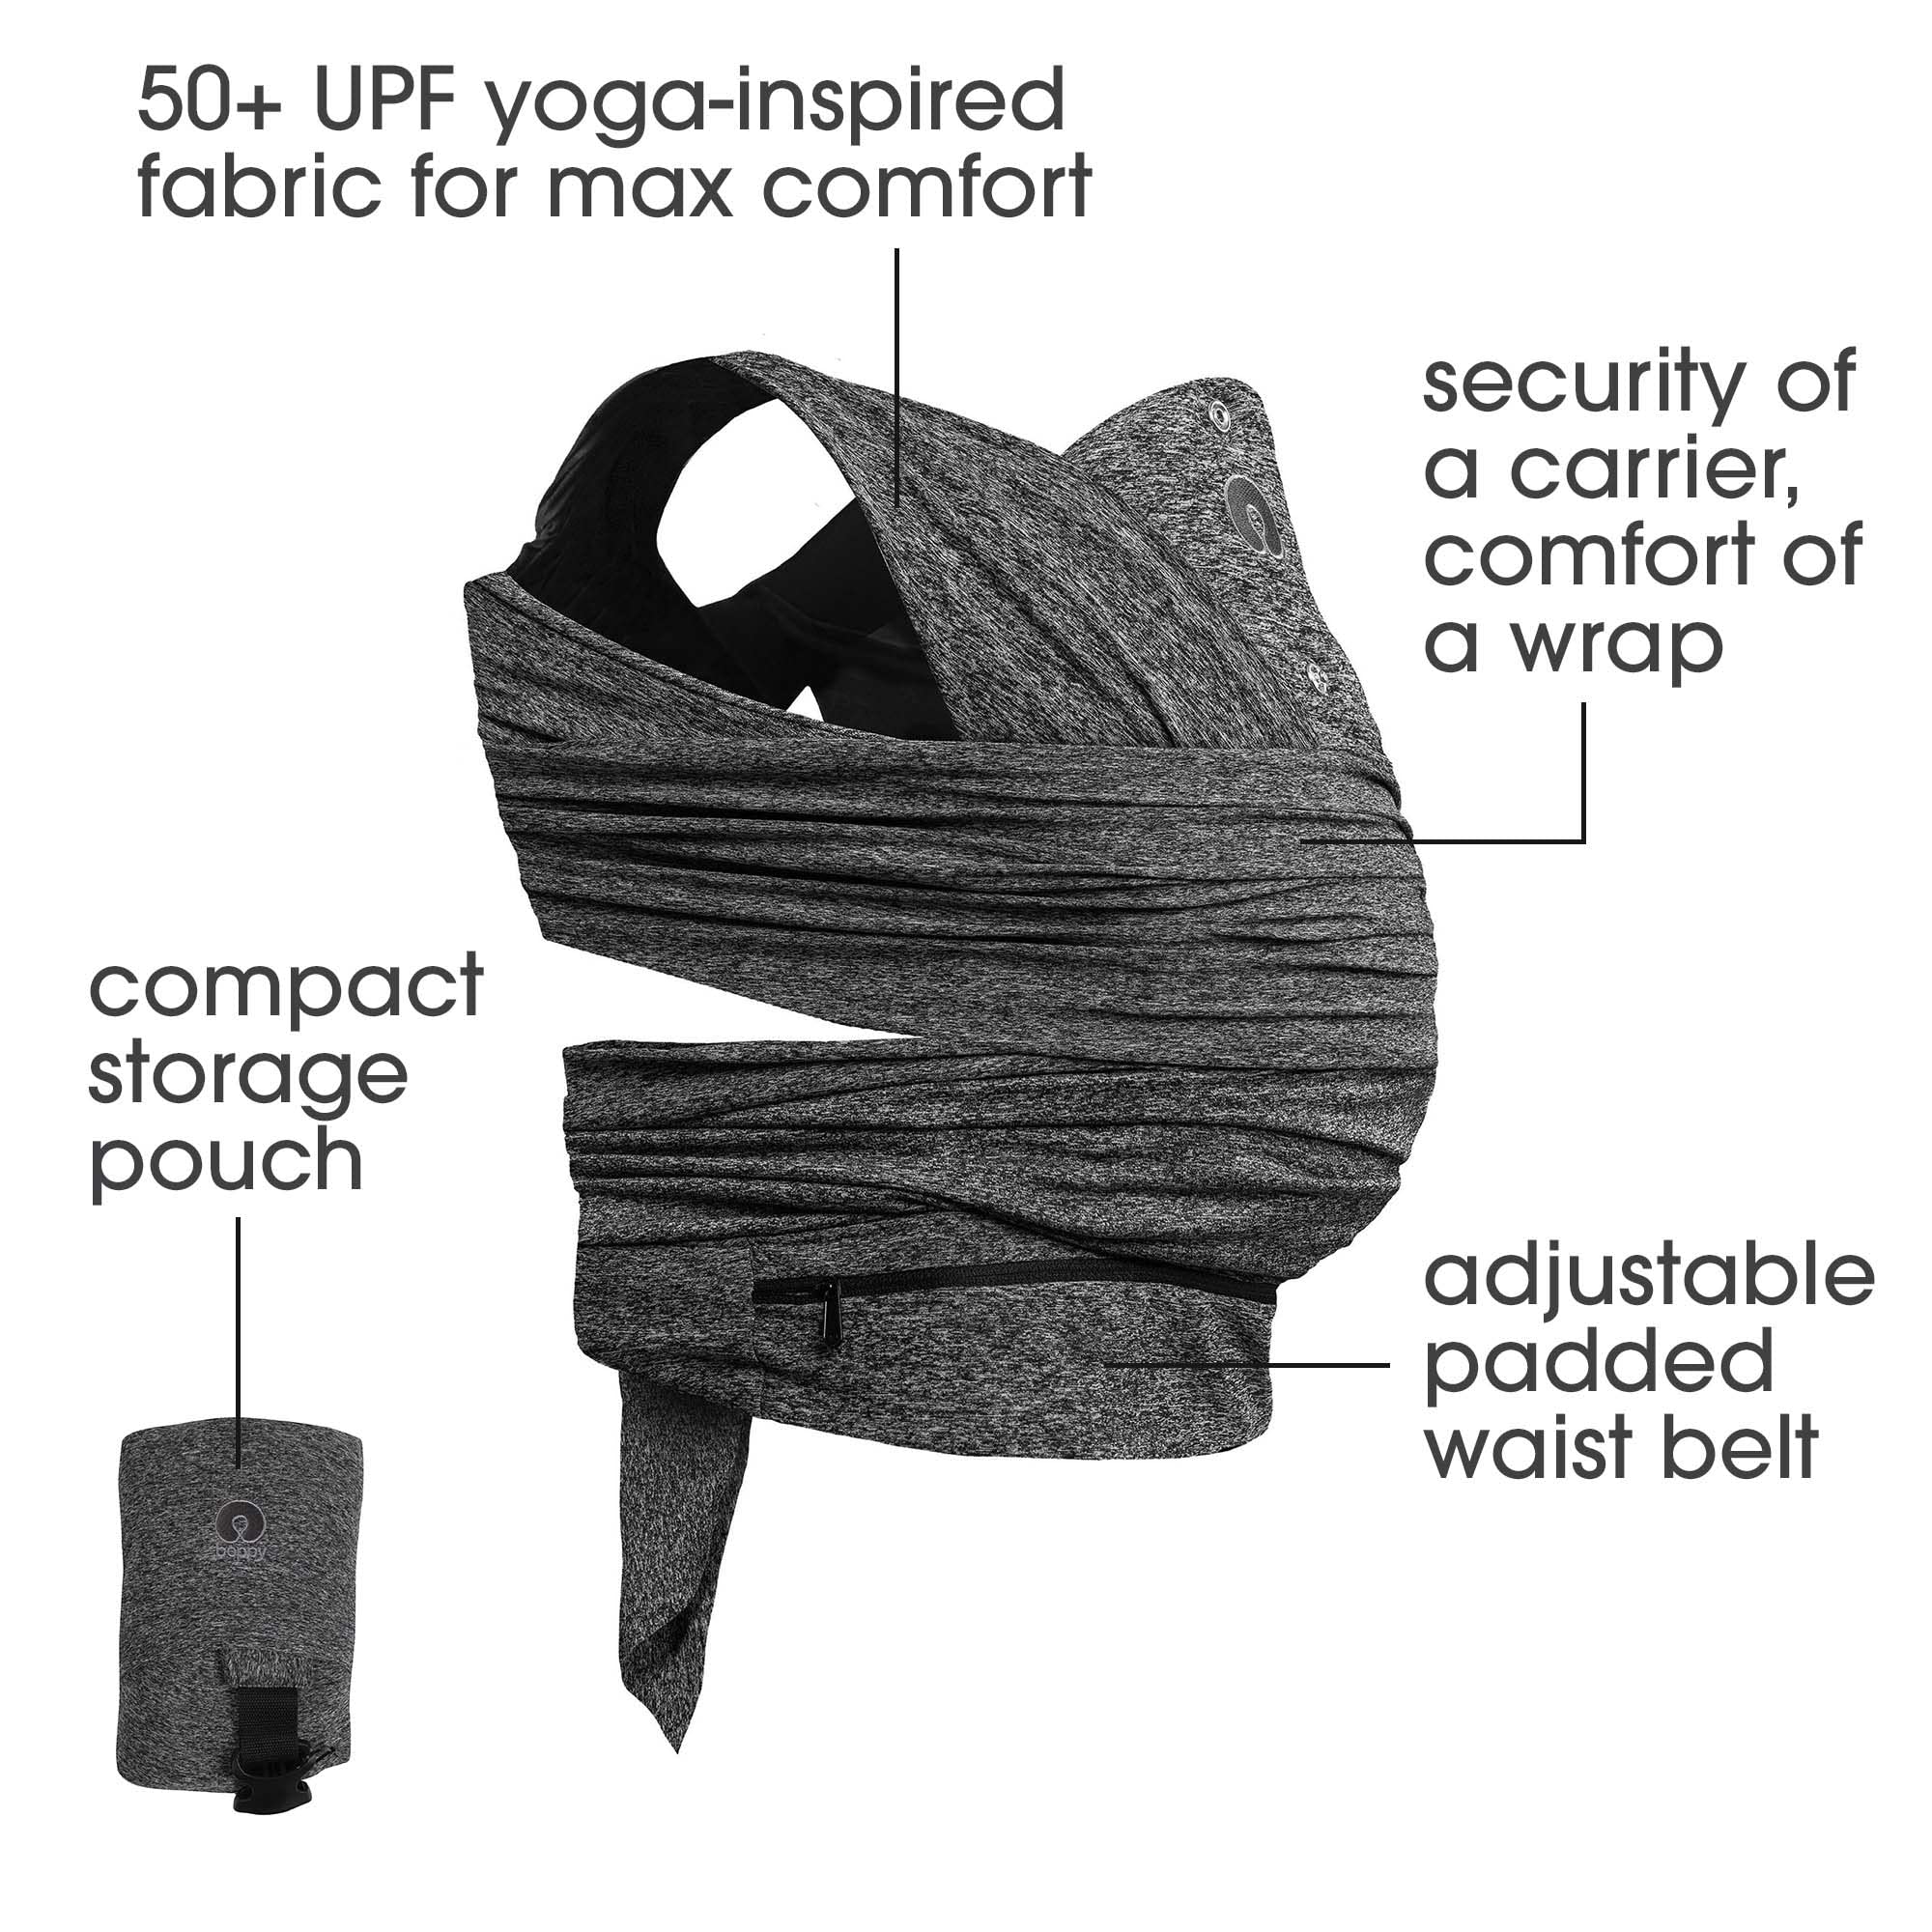 Boppy Baby Carrier - ComfyFit, Heathered Gray, Hybrid Wrap, 3 Carrying Positions, 0m+ 8-35lbs, Soft Yoga-Inspired Fabric with Integrated Storage Pouch